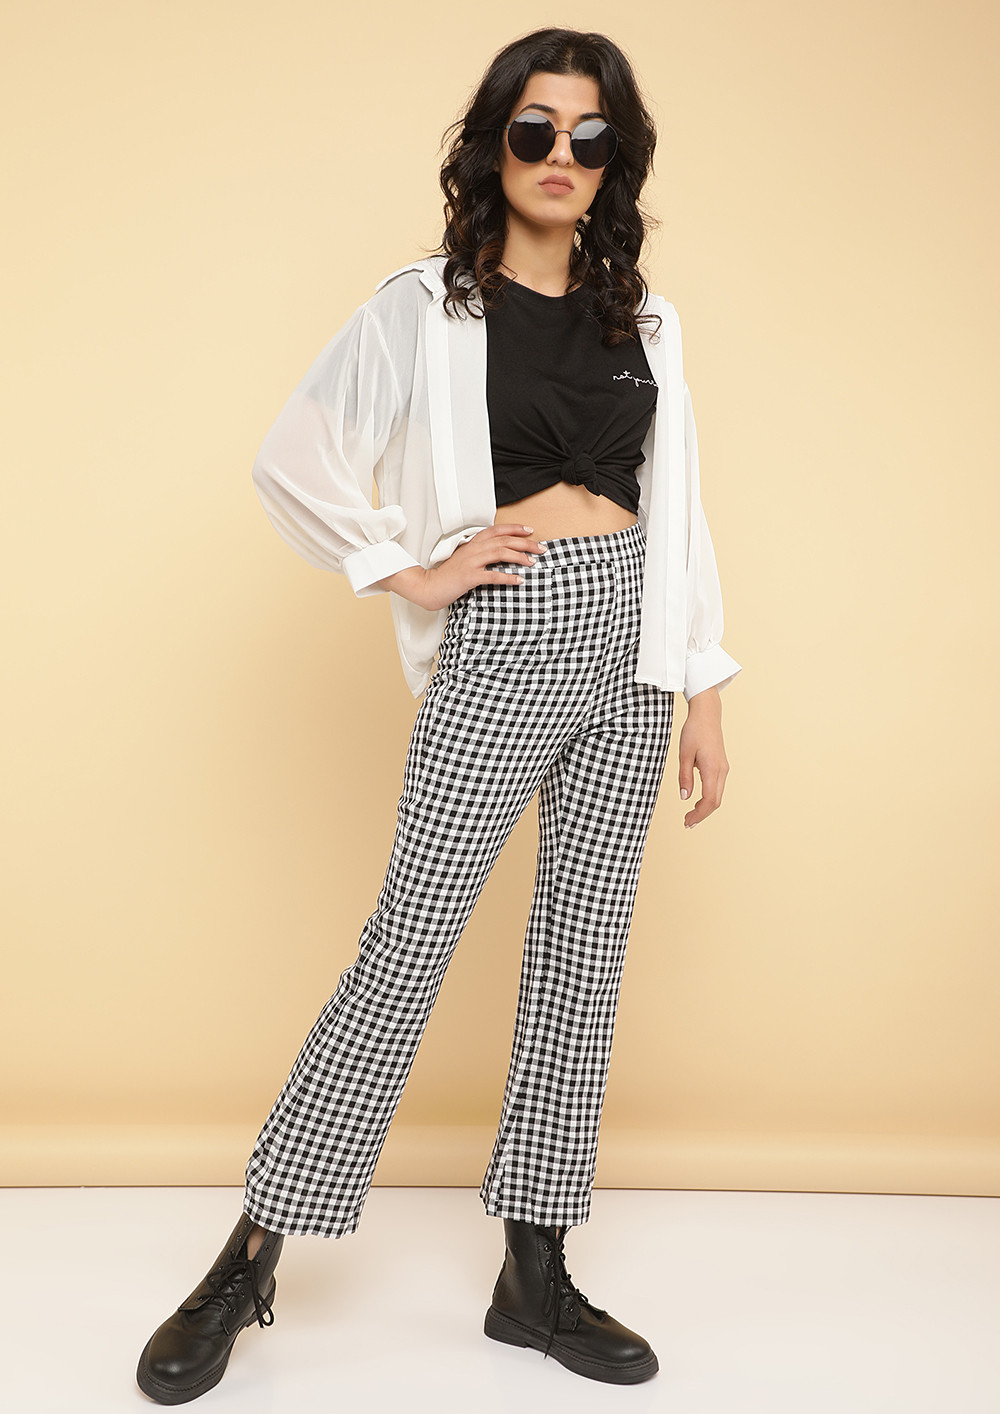 Trousers  Pants for womens Black  White Check